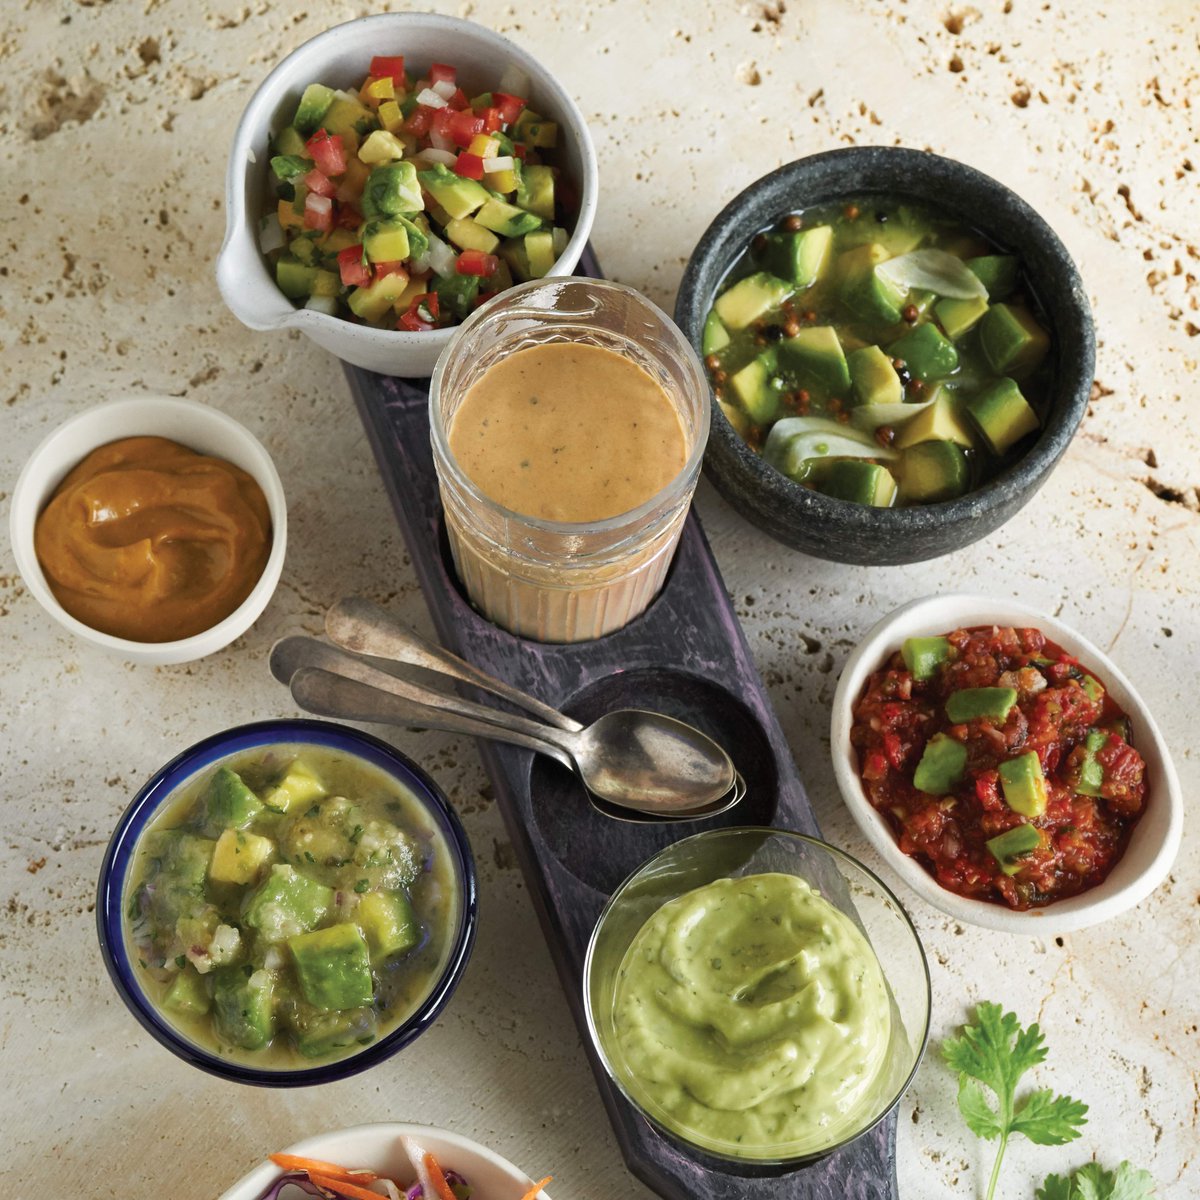 Kickstart your Cinco de Mayo party and #MakeItBetter with these avo-based salsas! 🥑🍅 #AlwaysGood #AvocadoSalsa #CincoDeMayo avocadosfrommexico.com/blog/cookingid…